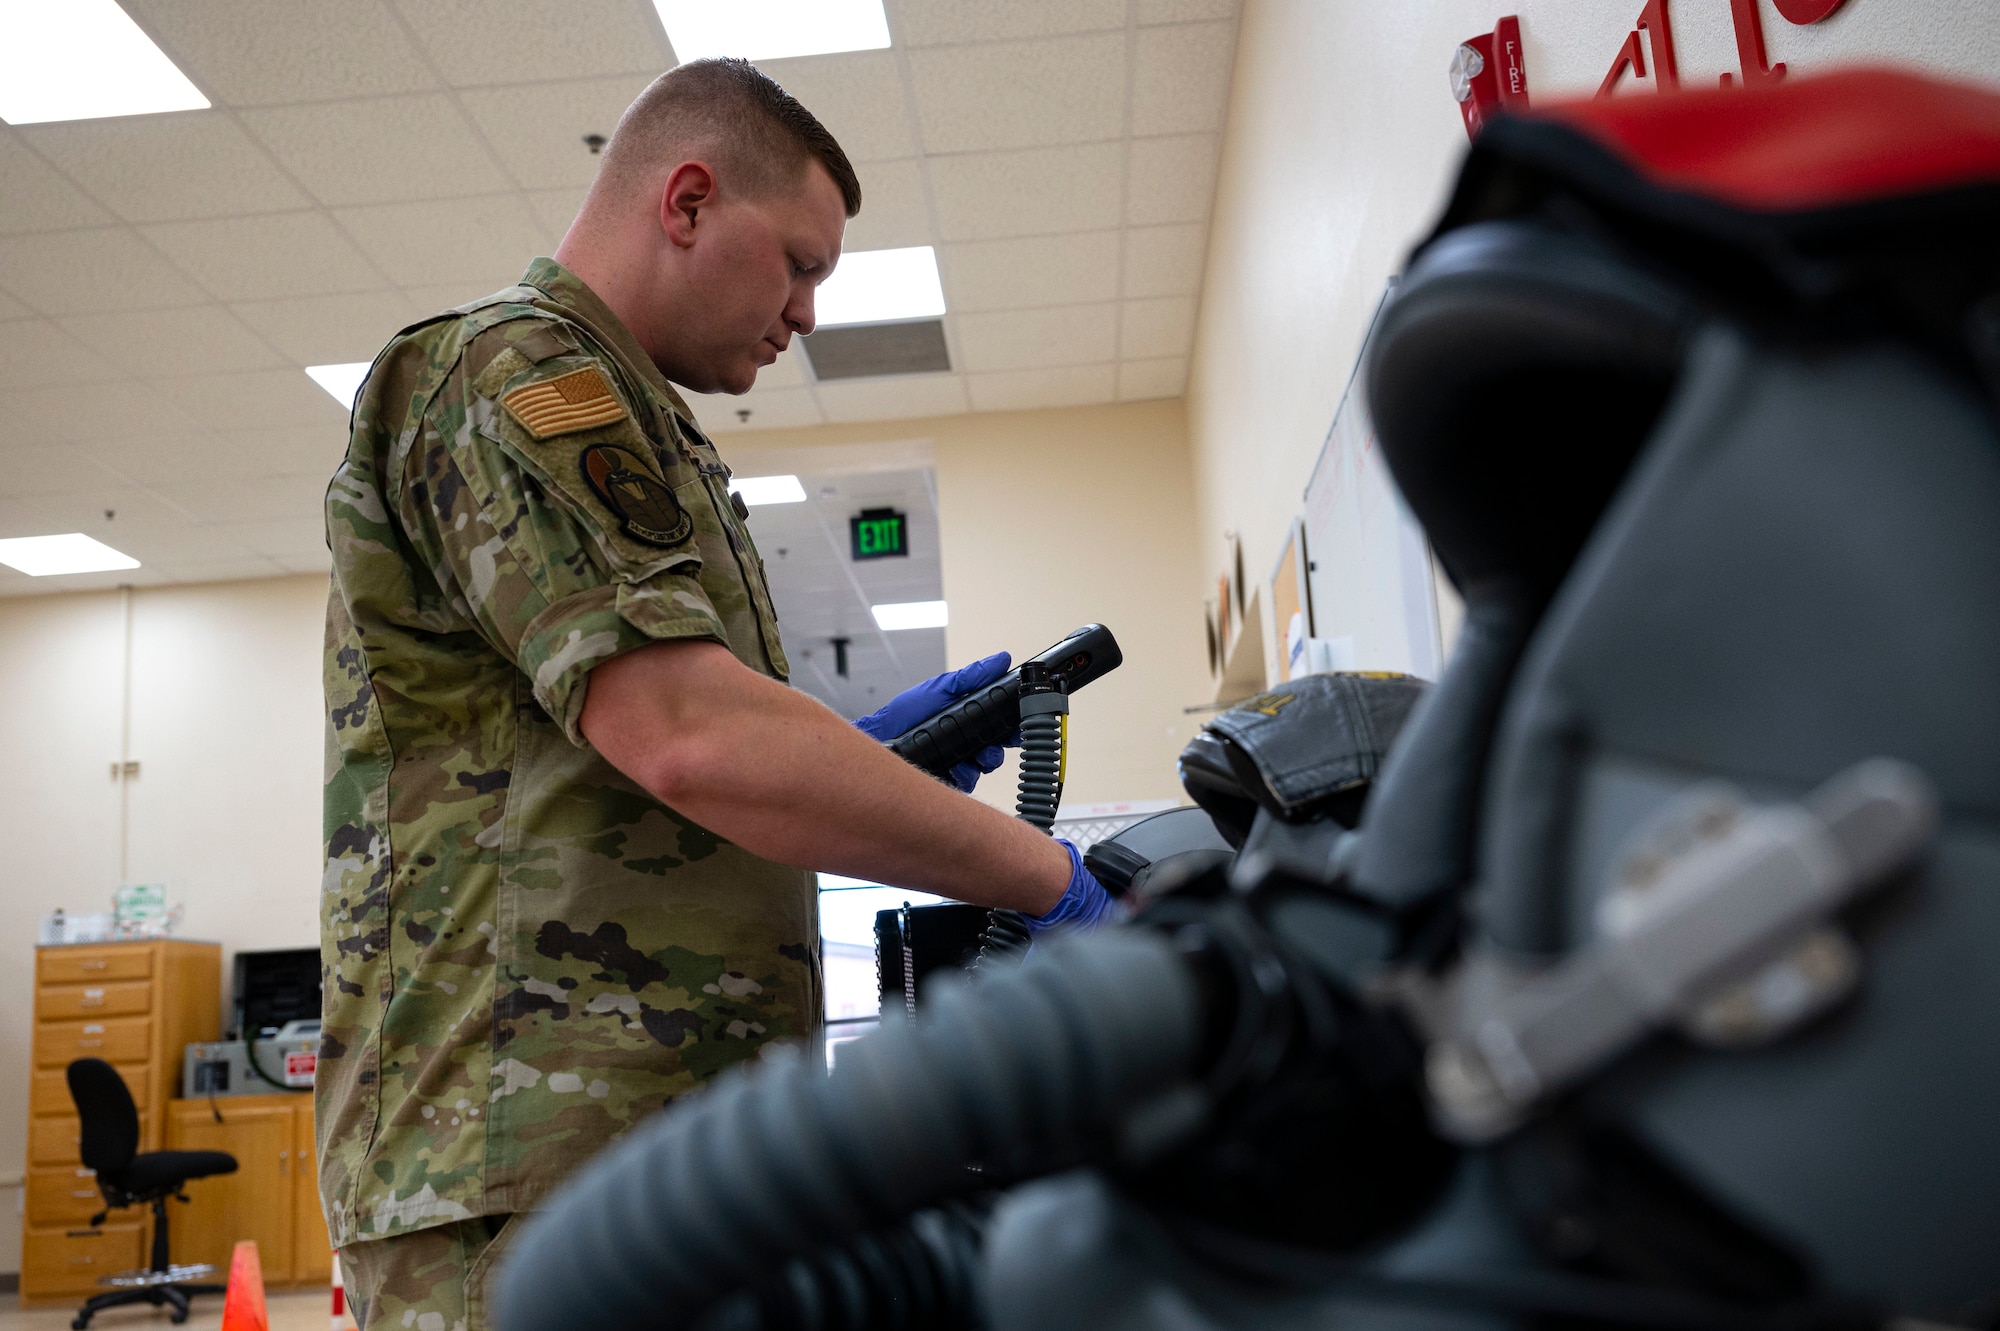 U.S. Air Force Senior Airman Kenneth Ball, 54th Operations Support Squadron aircrew flight equipment journeyman, tests the sound quality of helmets at Holloman Air Force Base, New Mexico, June 8, 2023. The 54th OSS AFE is responsible for providing quality maintenance on the flight gear of every pilot on Holloman ensuring their safety during flights. (U.S. Air Force photo by Airman 1st Class Isaiah Pedrazzini)